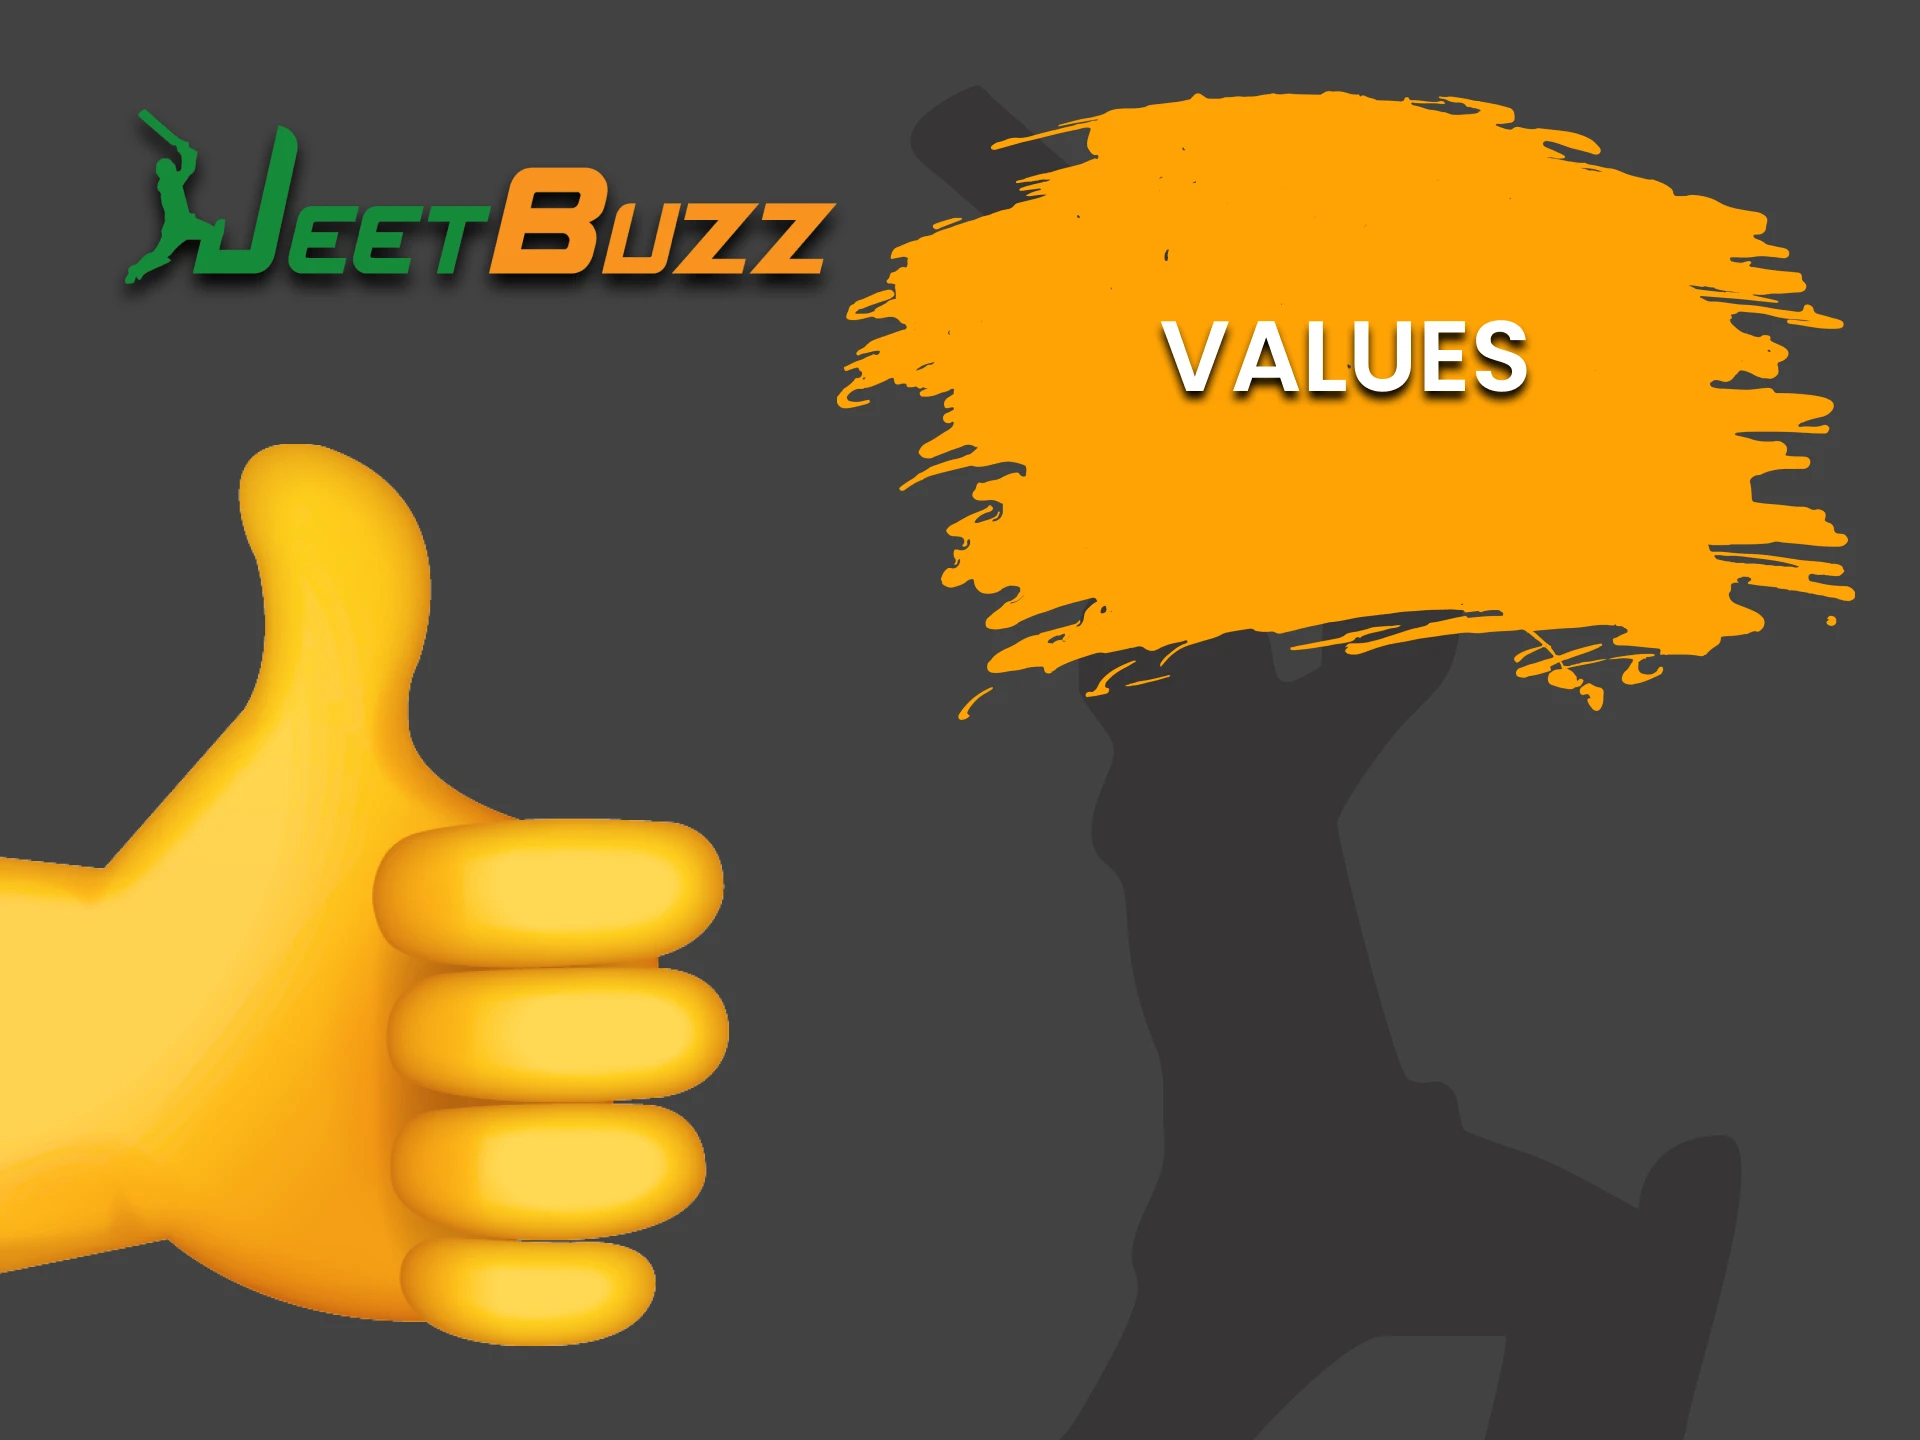 Learn about the benefits and values ​​of JeetBuzz.